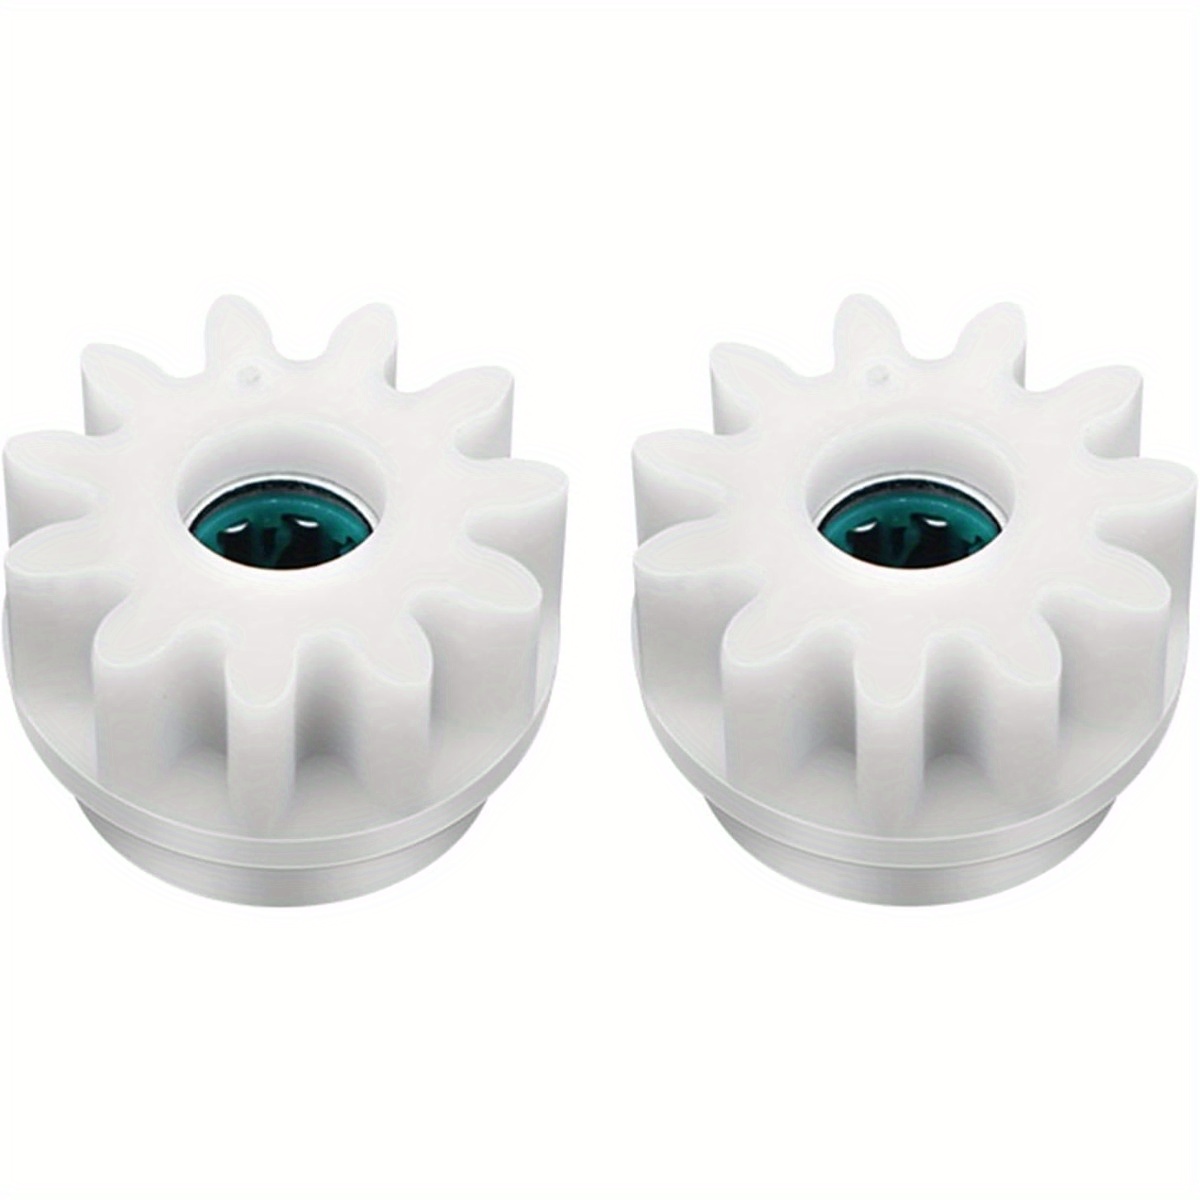 

2pcs, Spin Mop Replacement Gear Mop Bucket Pedal 1 Way Bearing Sprocket, Cleaning Supplies, Cleaning Accessories, Christmas Supplies